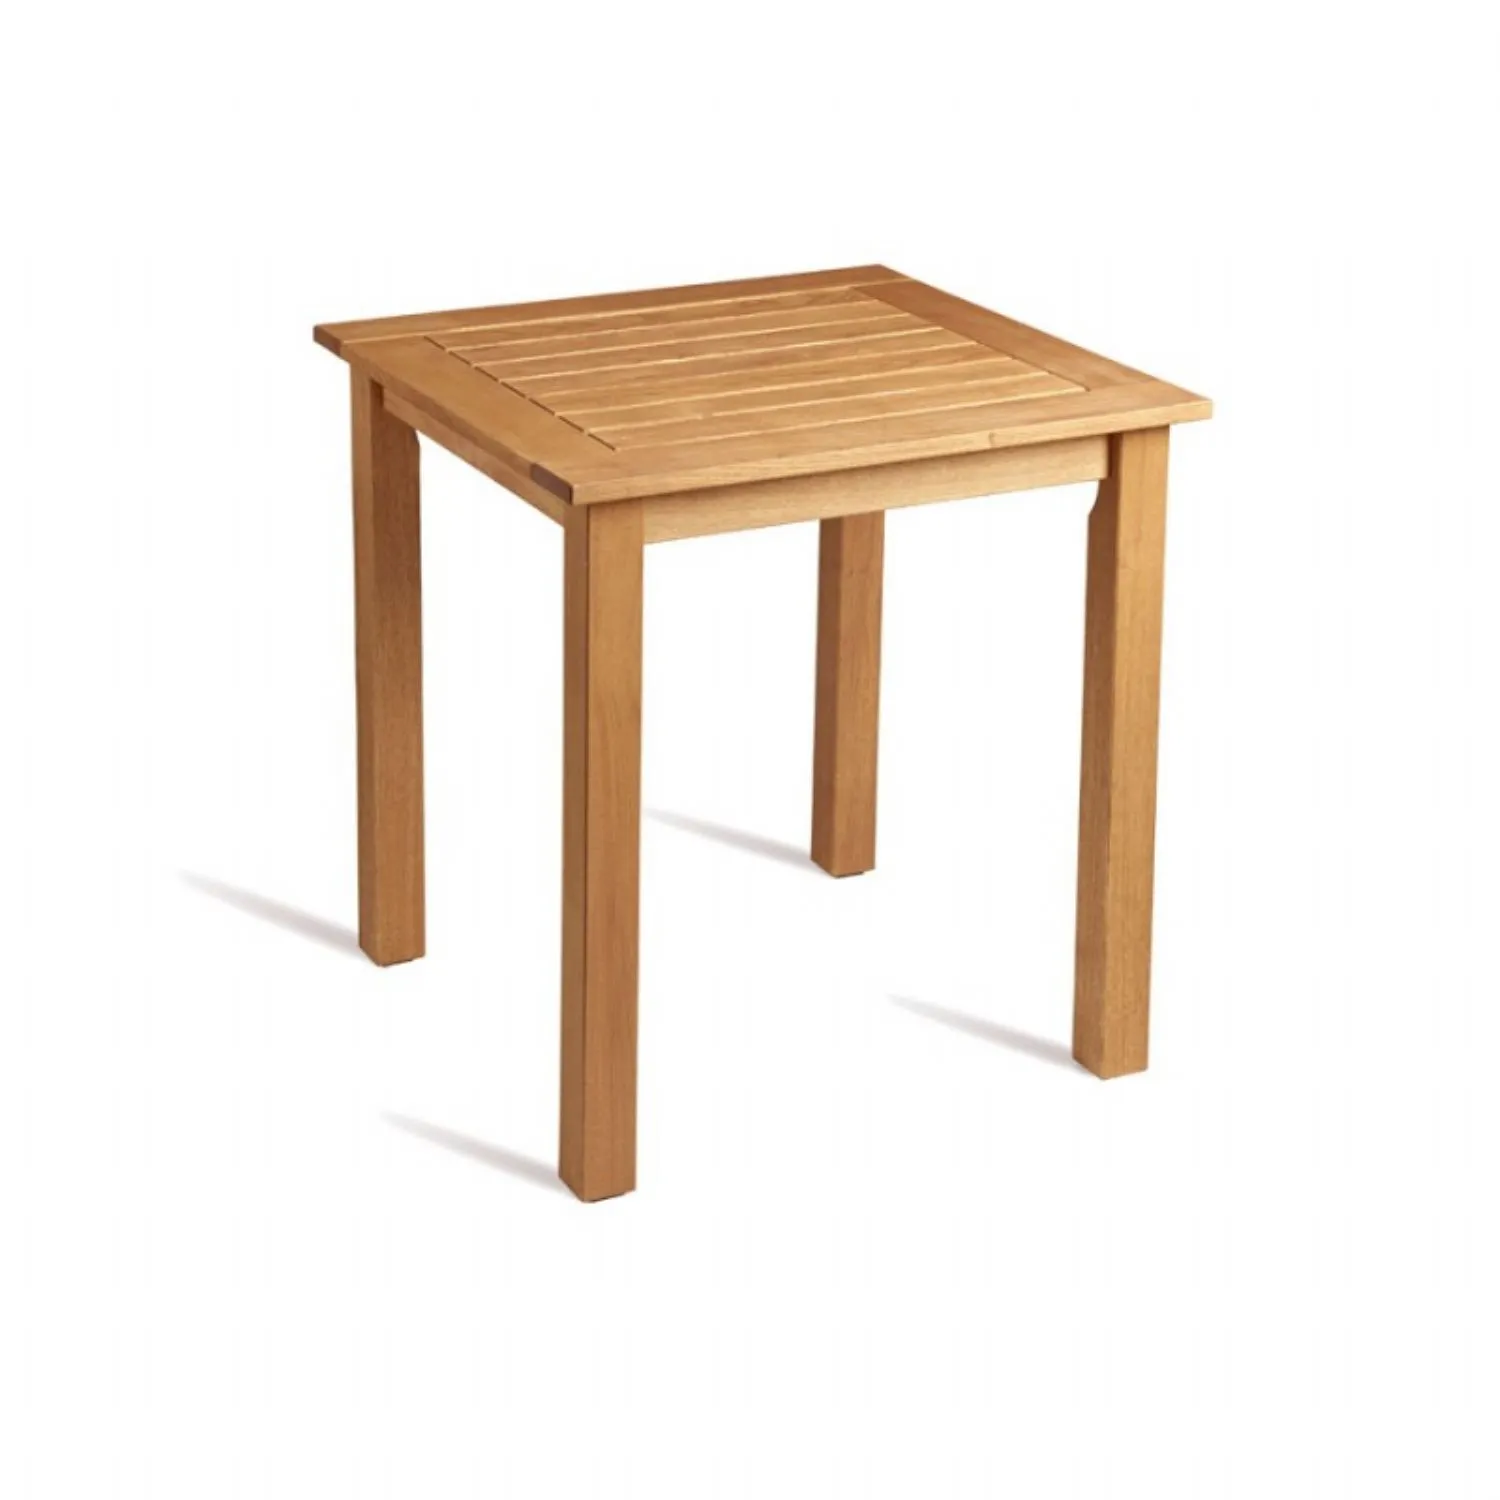 Robinia Wood Outdoor 80cm Dining Table